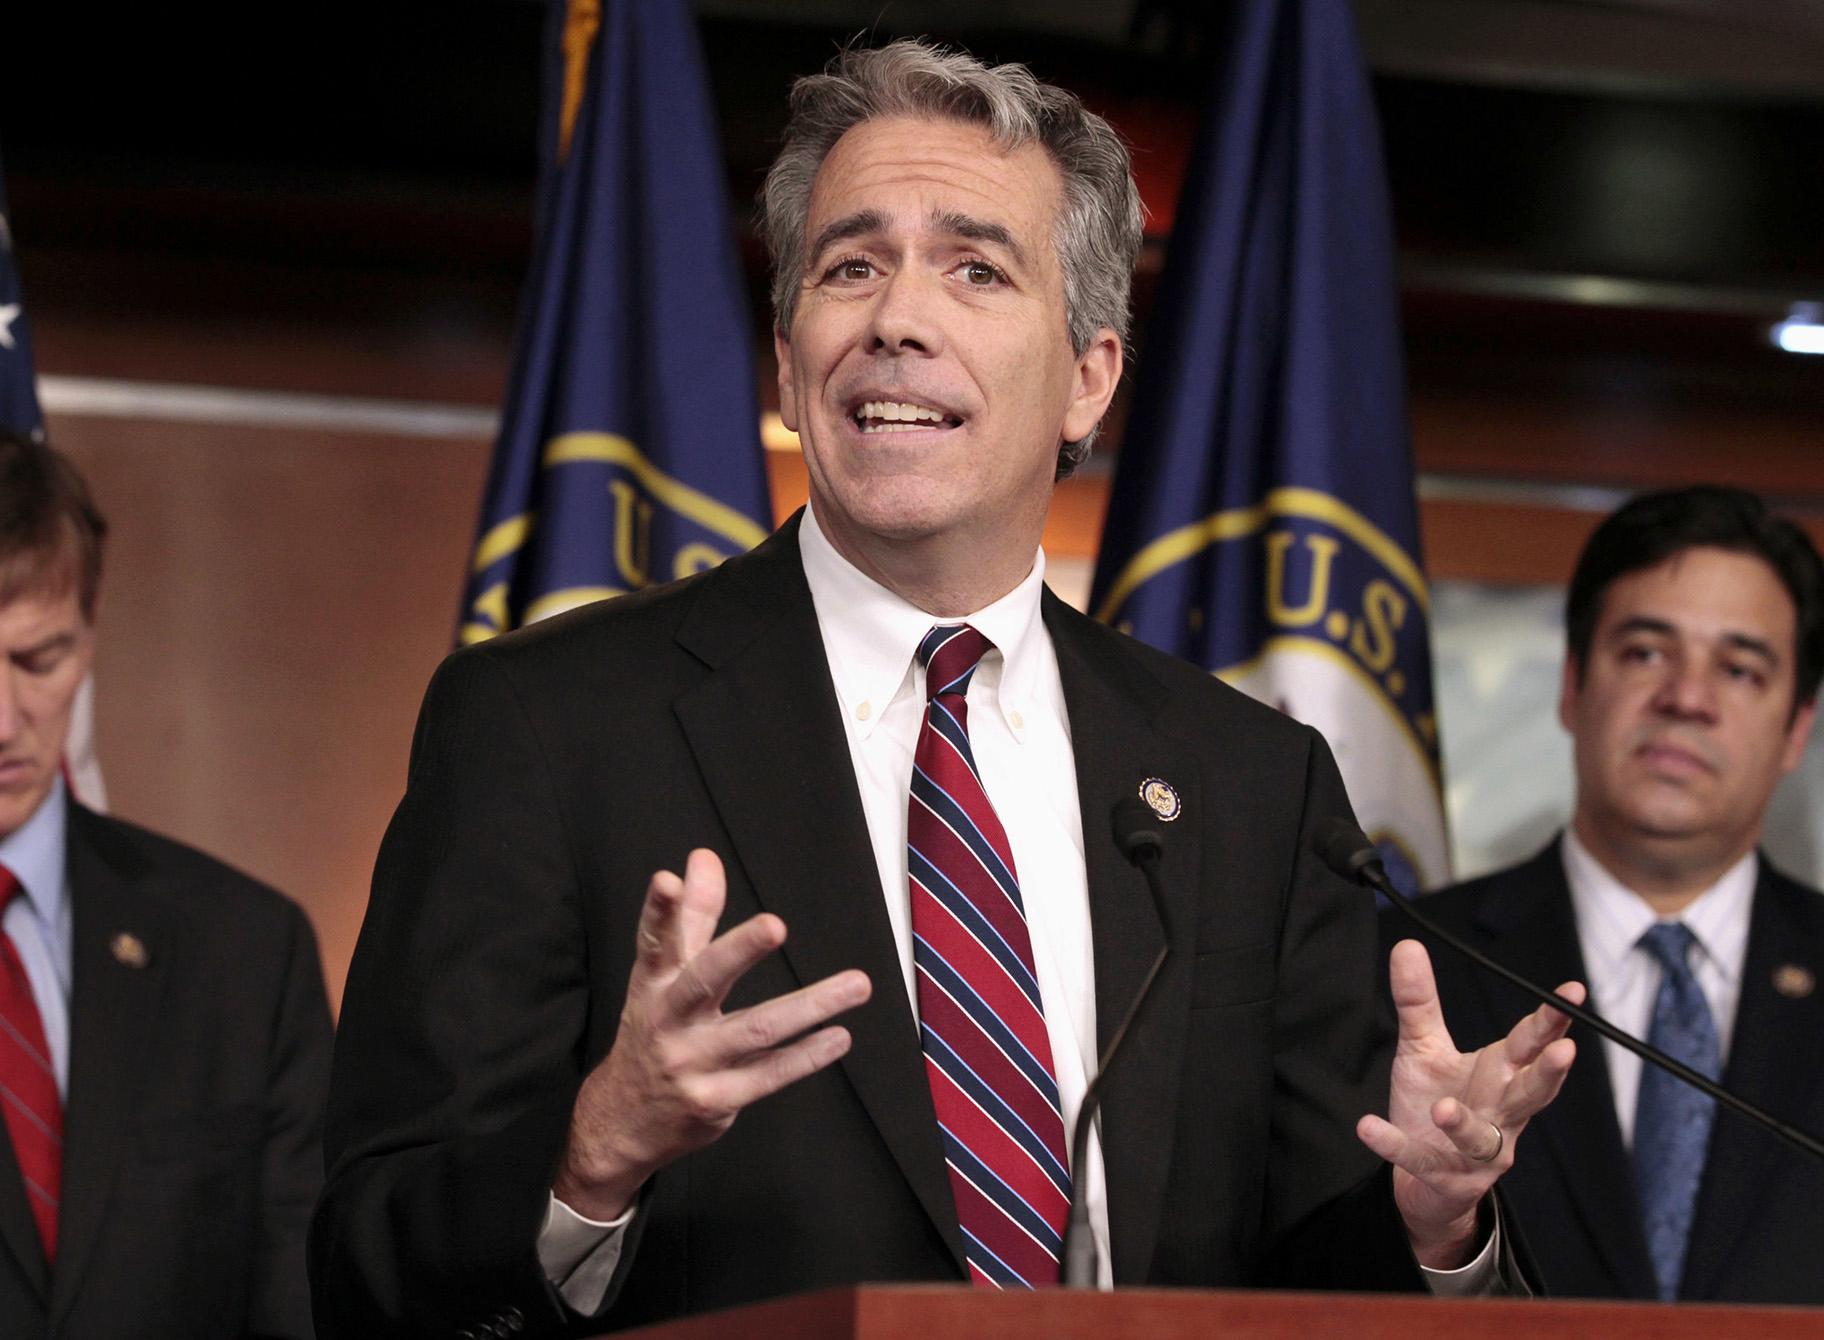 In this Nov. 15, 2011, file photo former U.S. Rep. Joe Walsh, R-Ill., gestures during a news conference on Capitol Hill in Washington. (AP Photo / Carolyn Kaster, File)